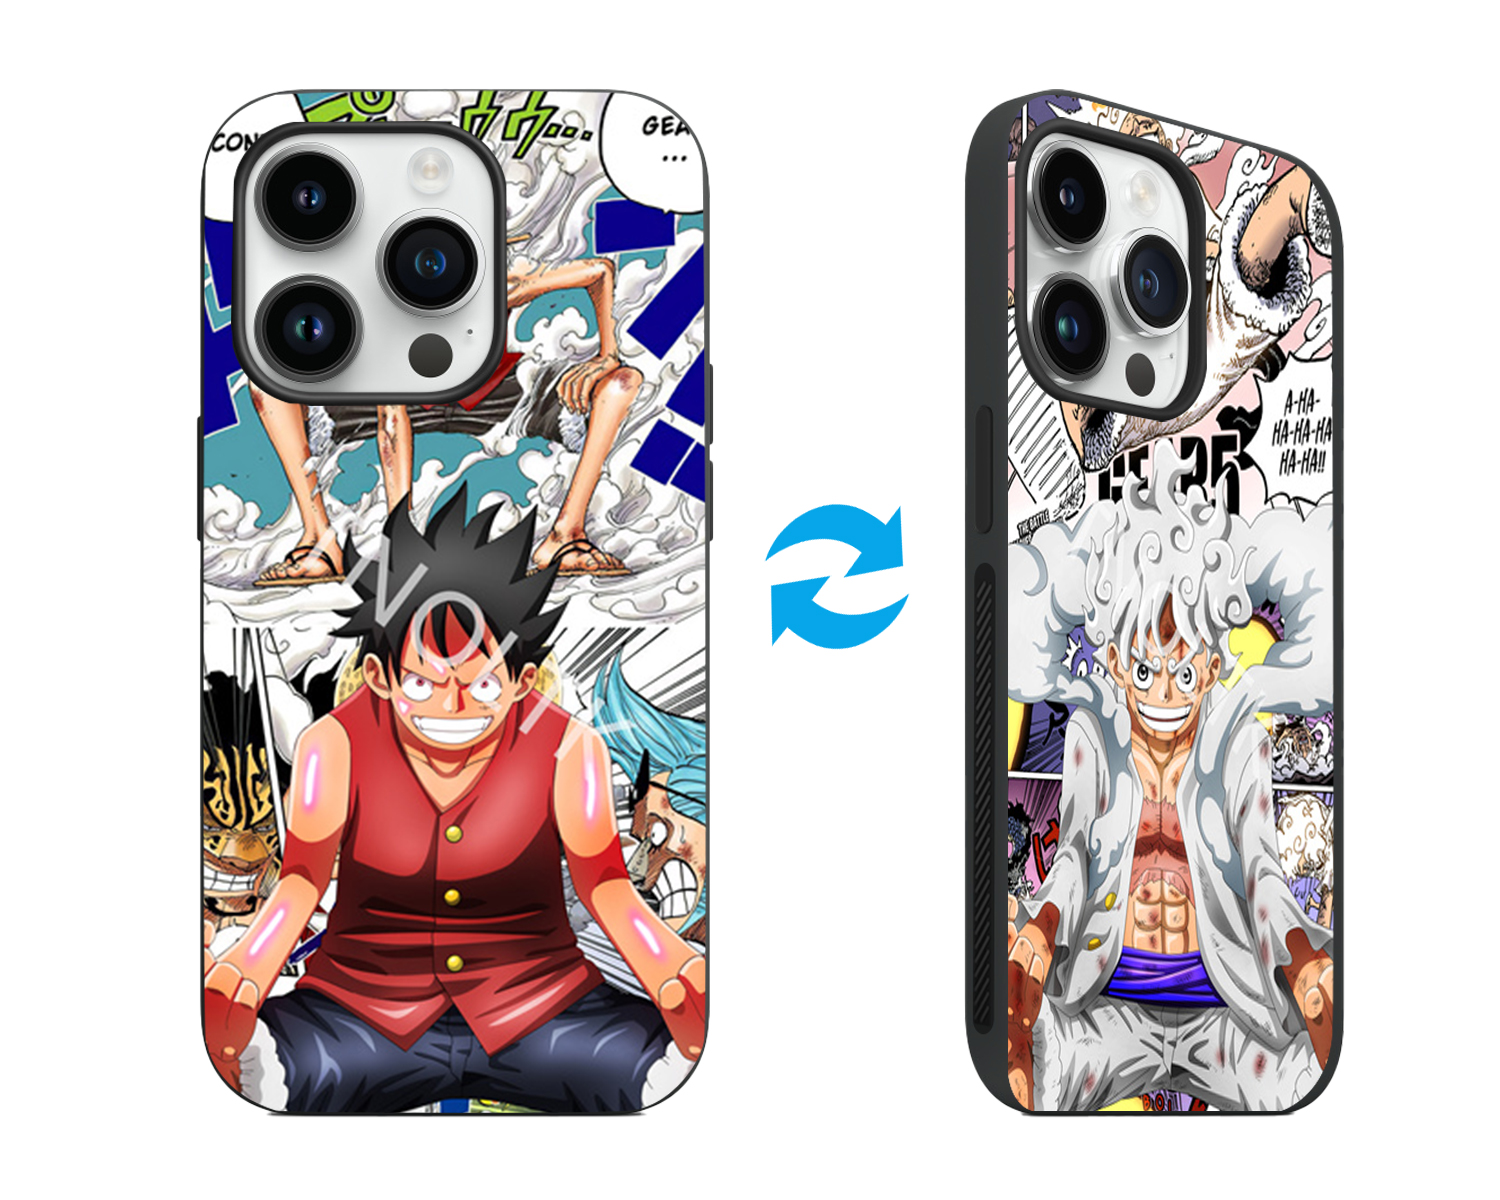 3D Motion iPhone One Piece Anime Phone Cases